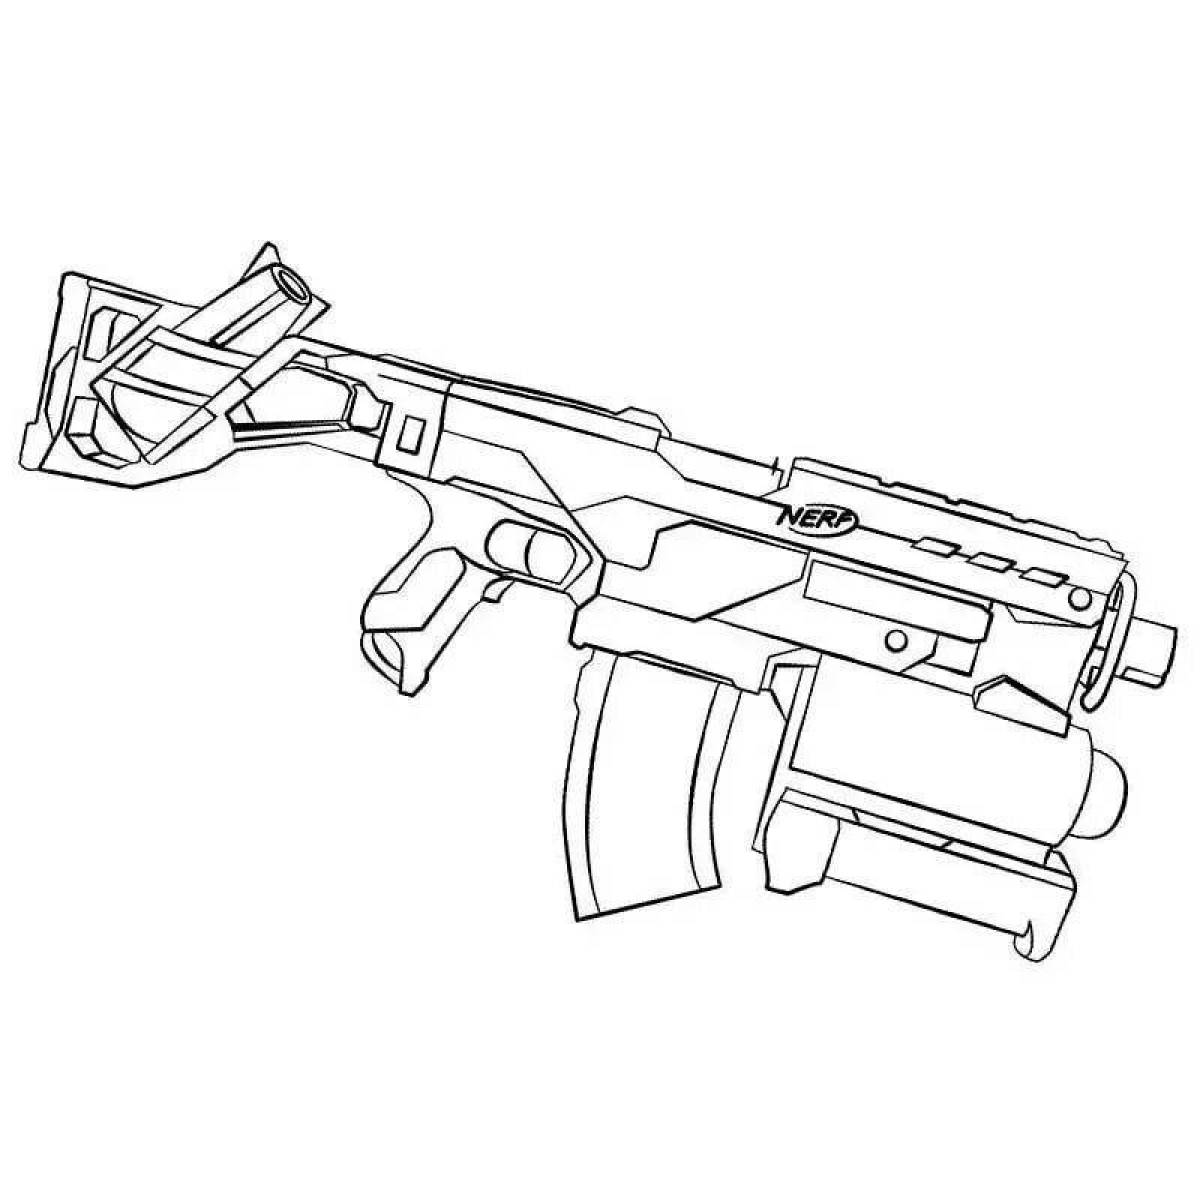 Fine gun coloring pages for boys